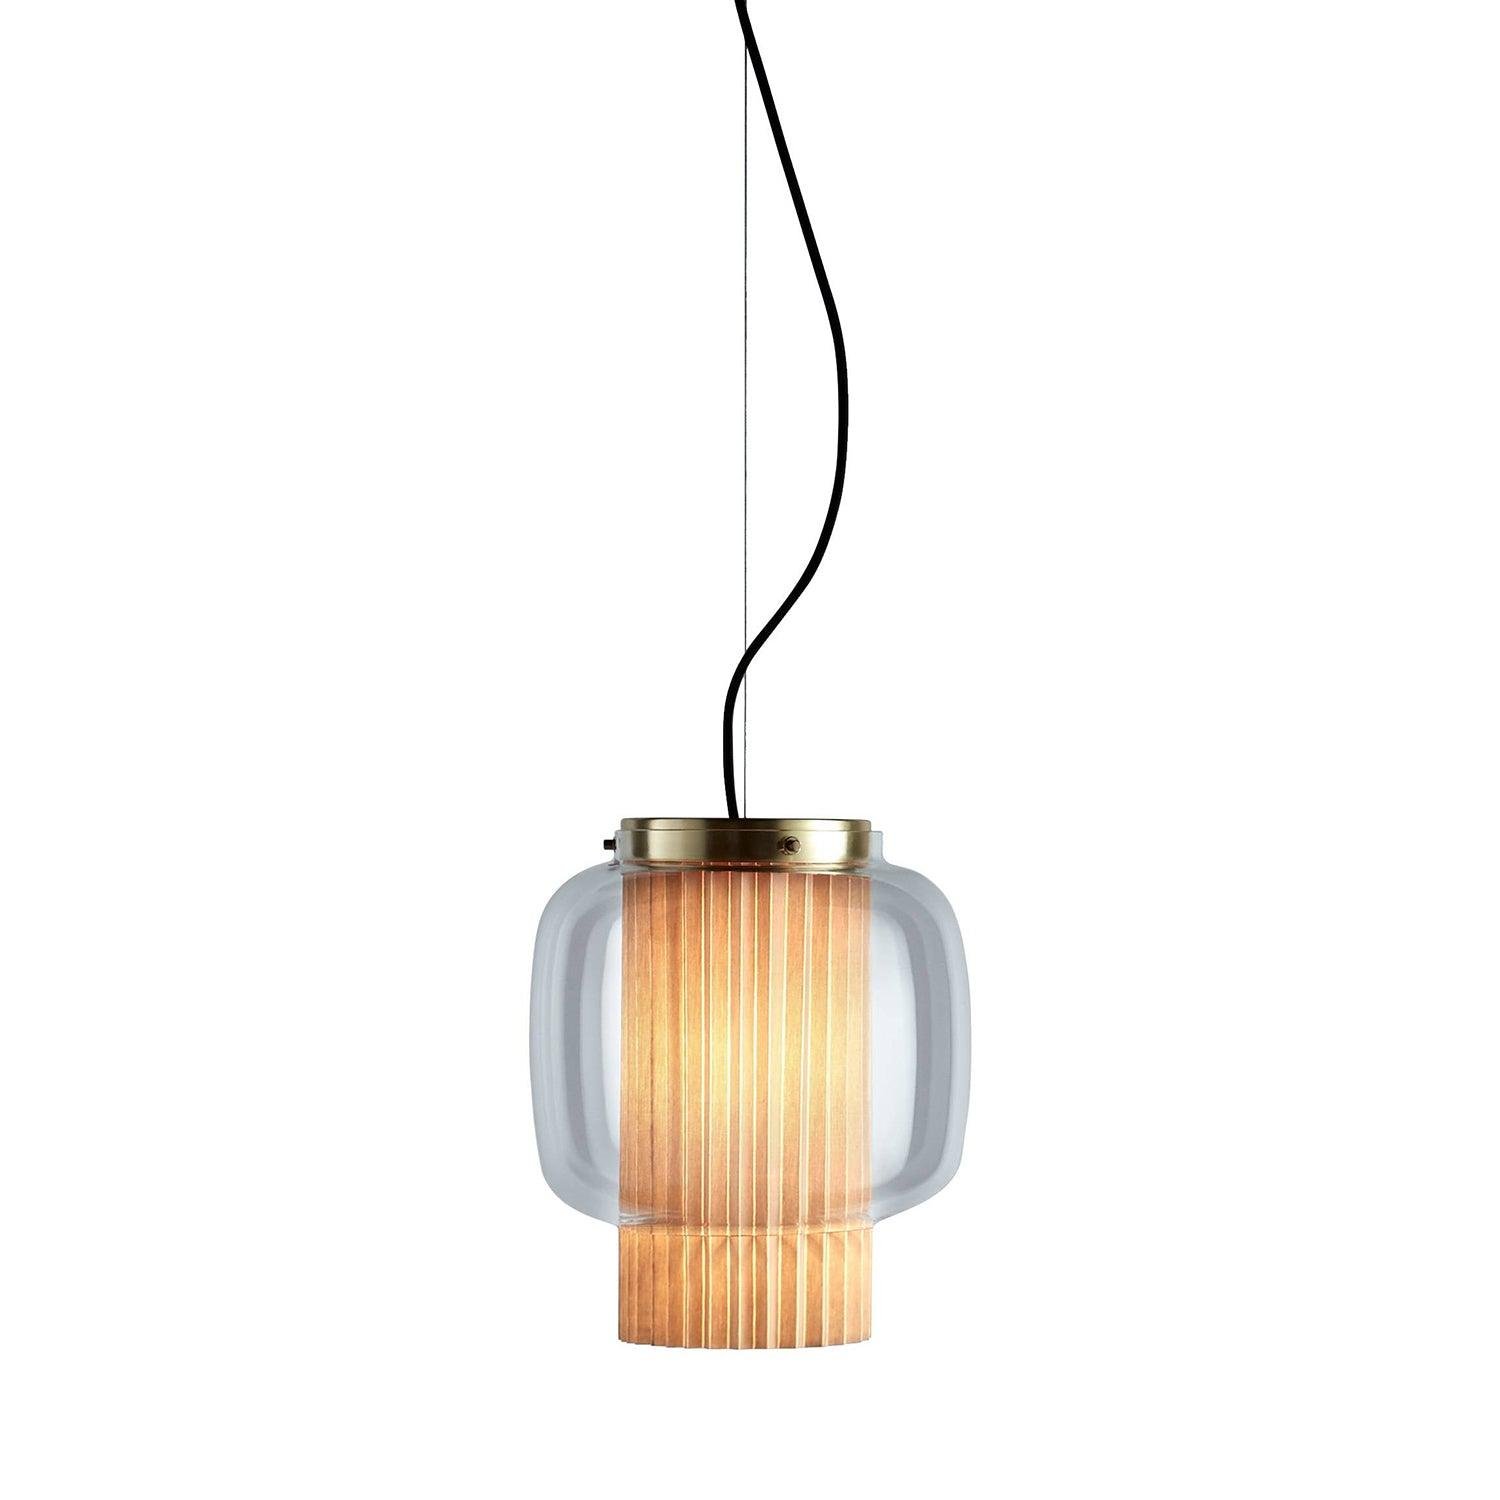 Gold and Clear Manila T Pendant Lamp with a diameter of 9.8 inches and a height of 10.8 inches, or 25cm x 27.5cm.